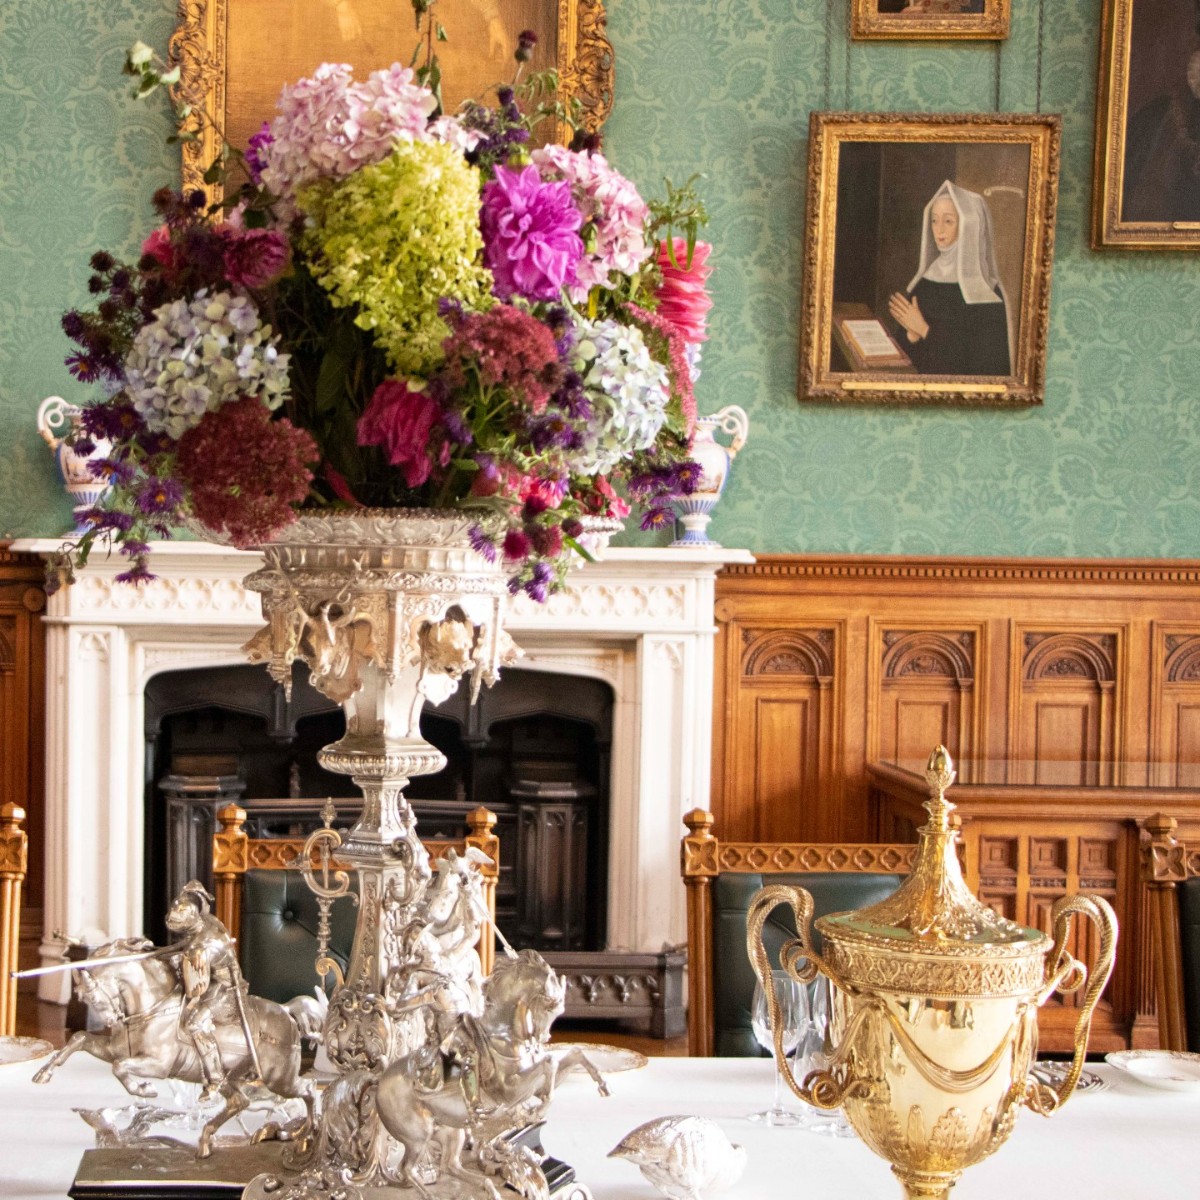 Jonathan Cullum, our Head Butler, puts in countless hours polishing #silver and #gold to maintain our regal collection of #antiques and racing trophies. 
#cherishedantiques #butler #incentivetravel #uniquevenues #historichouse